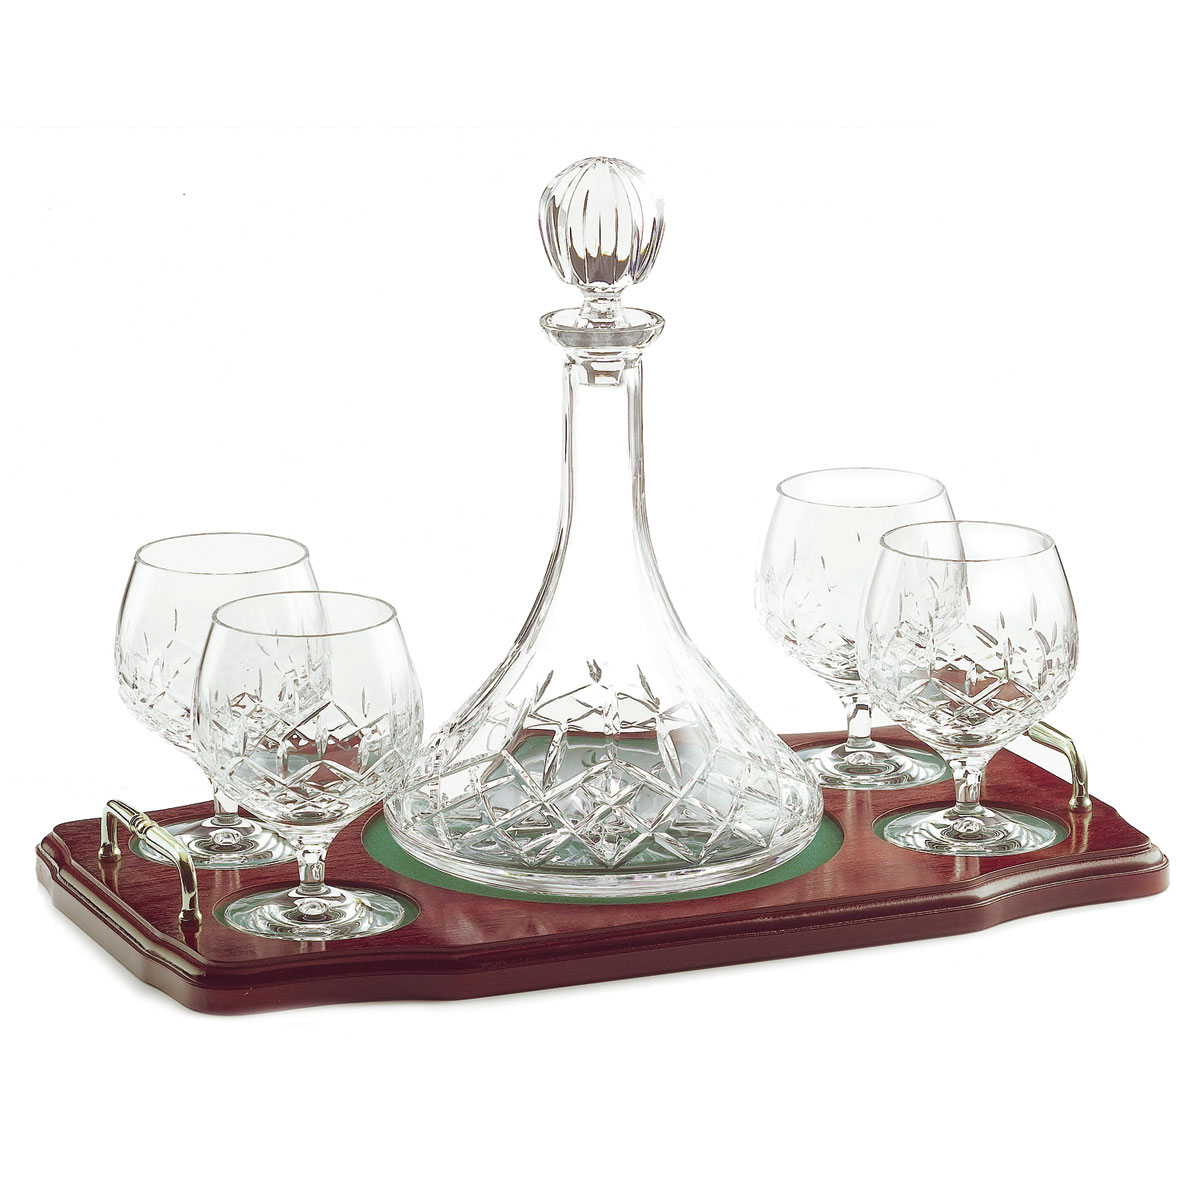 Galway Crystal Longford Miniature Brandy Decanter Tray Set